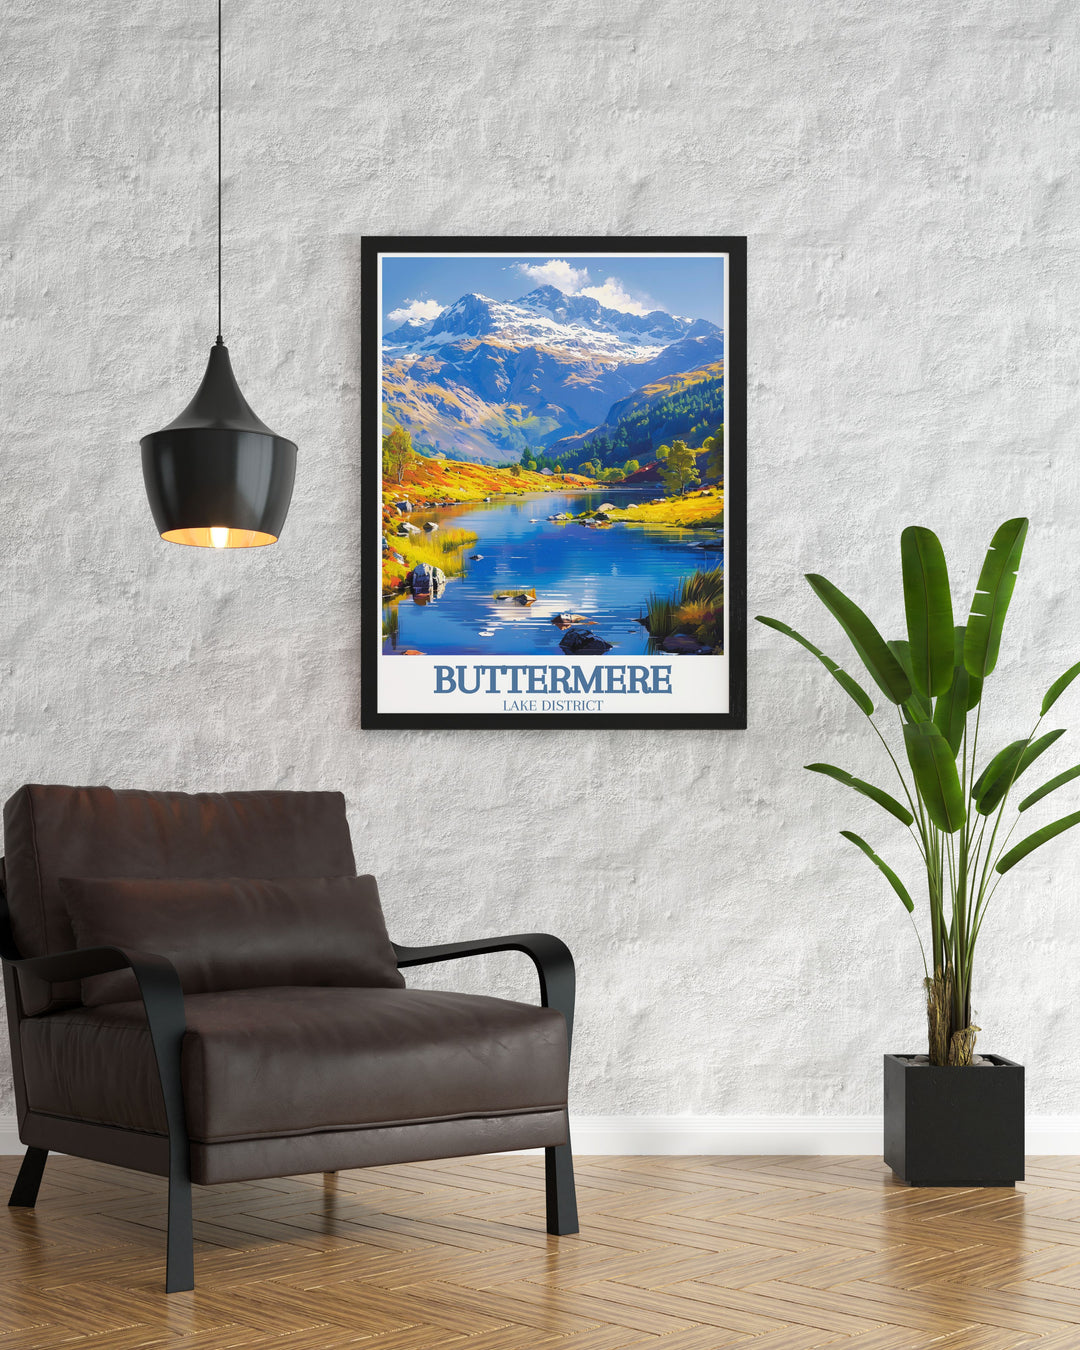 Featuring the lush landscapes and stunning views of the Lake District, this travel poster captures the natural beauty of Buttermere, ideal for those who appreciate scenic landscapes.